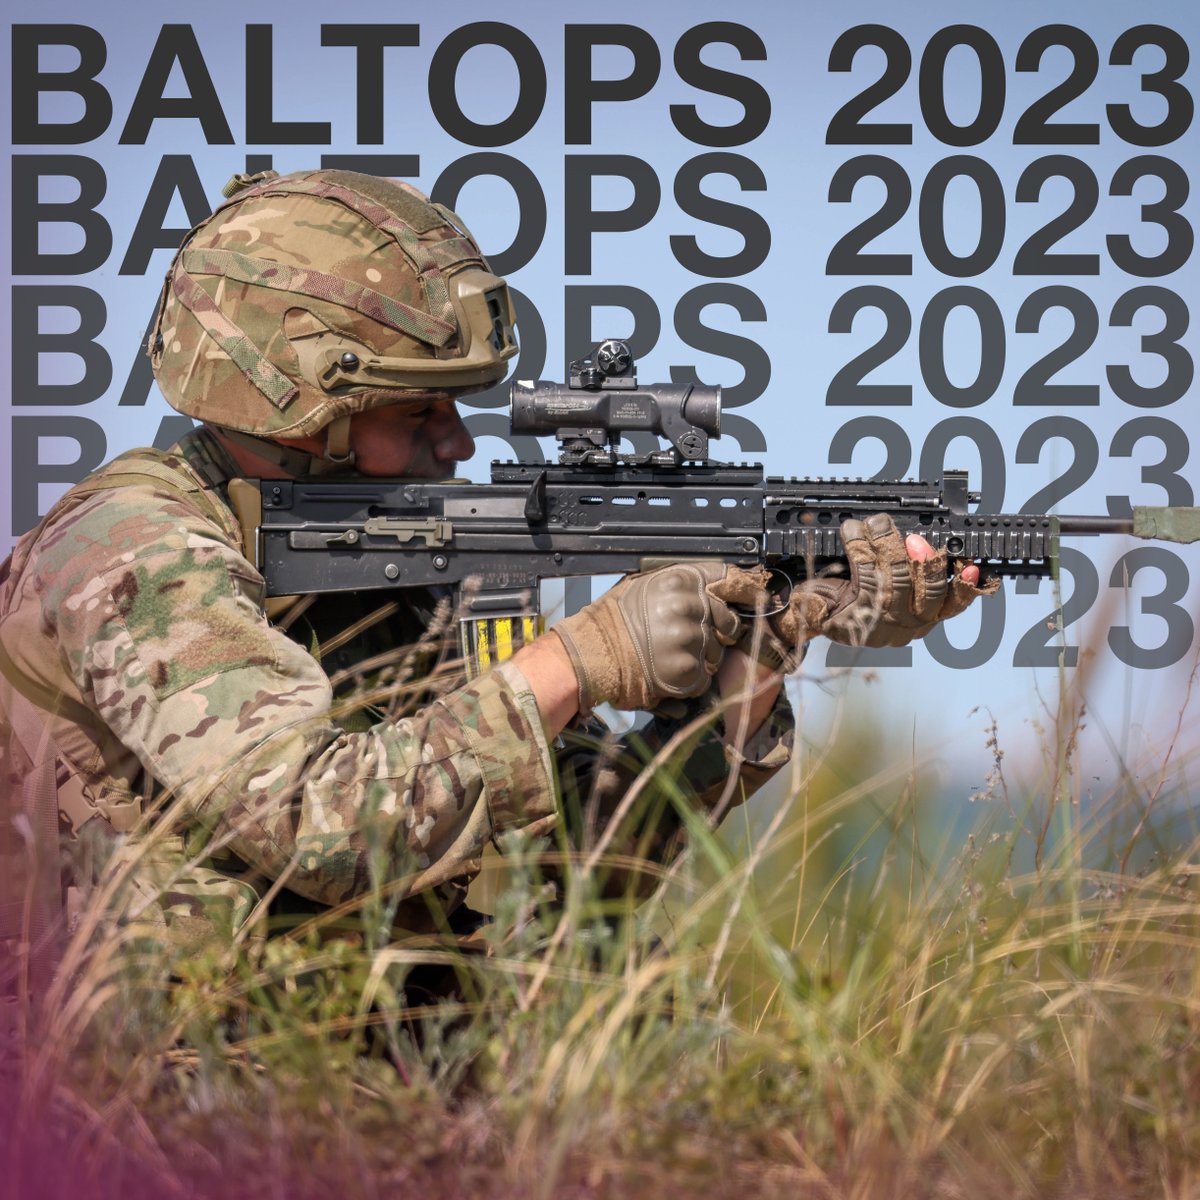 ⚓️  @hms_albion  🇬🇧 deployed Assualt Squadron Royal Marine personnel to conduct WADER drills in Latvia🇱🇻

This is part of the wider BALTOPS 2023, the 52nd iteration of the BALTOPS exercise, a  US-led NATO military exercise🇺🇸

#WeAreNATO #BALTOPS23 @USMC @45CdoGp @STRIKFORNATO